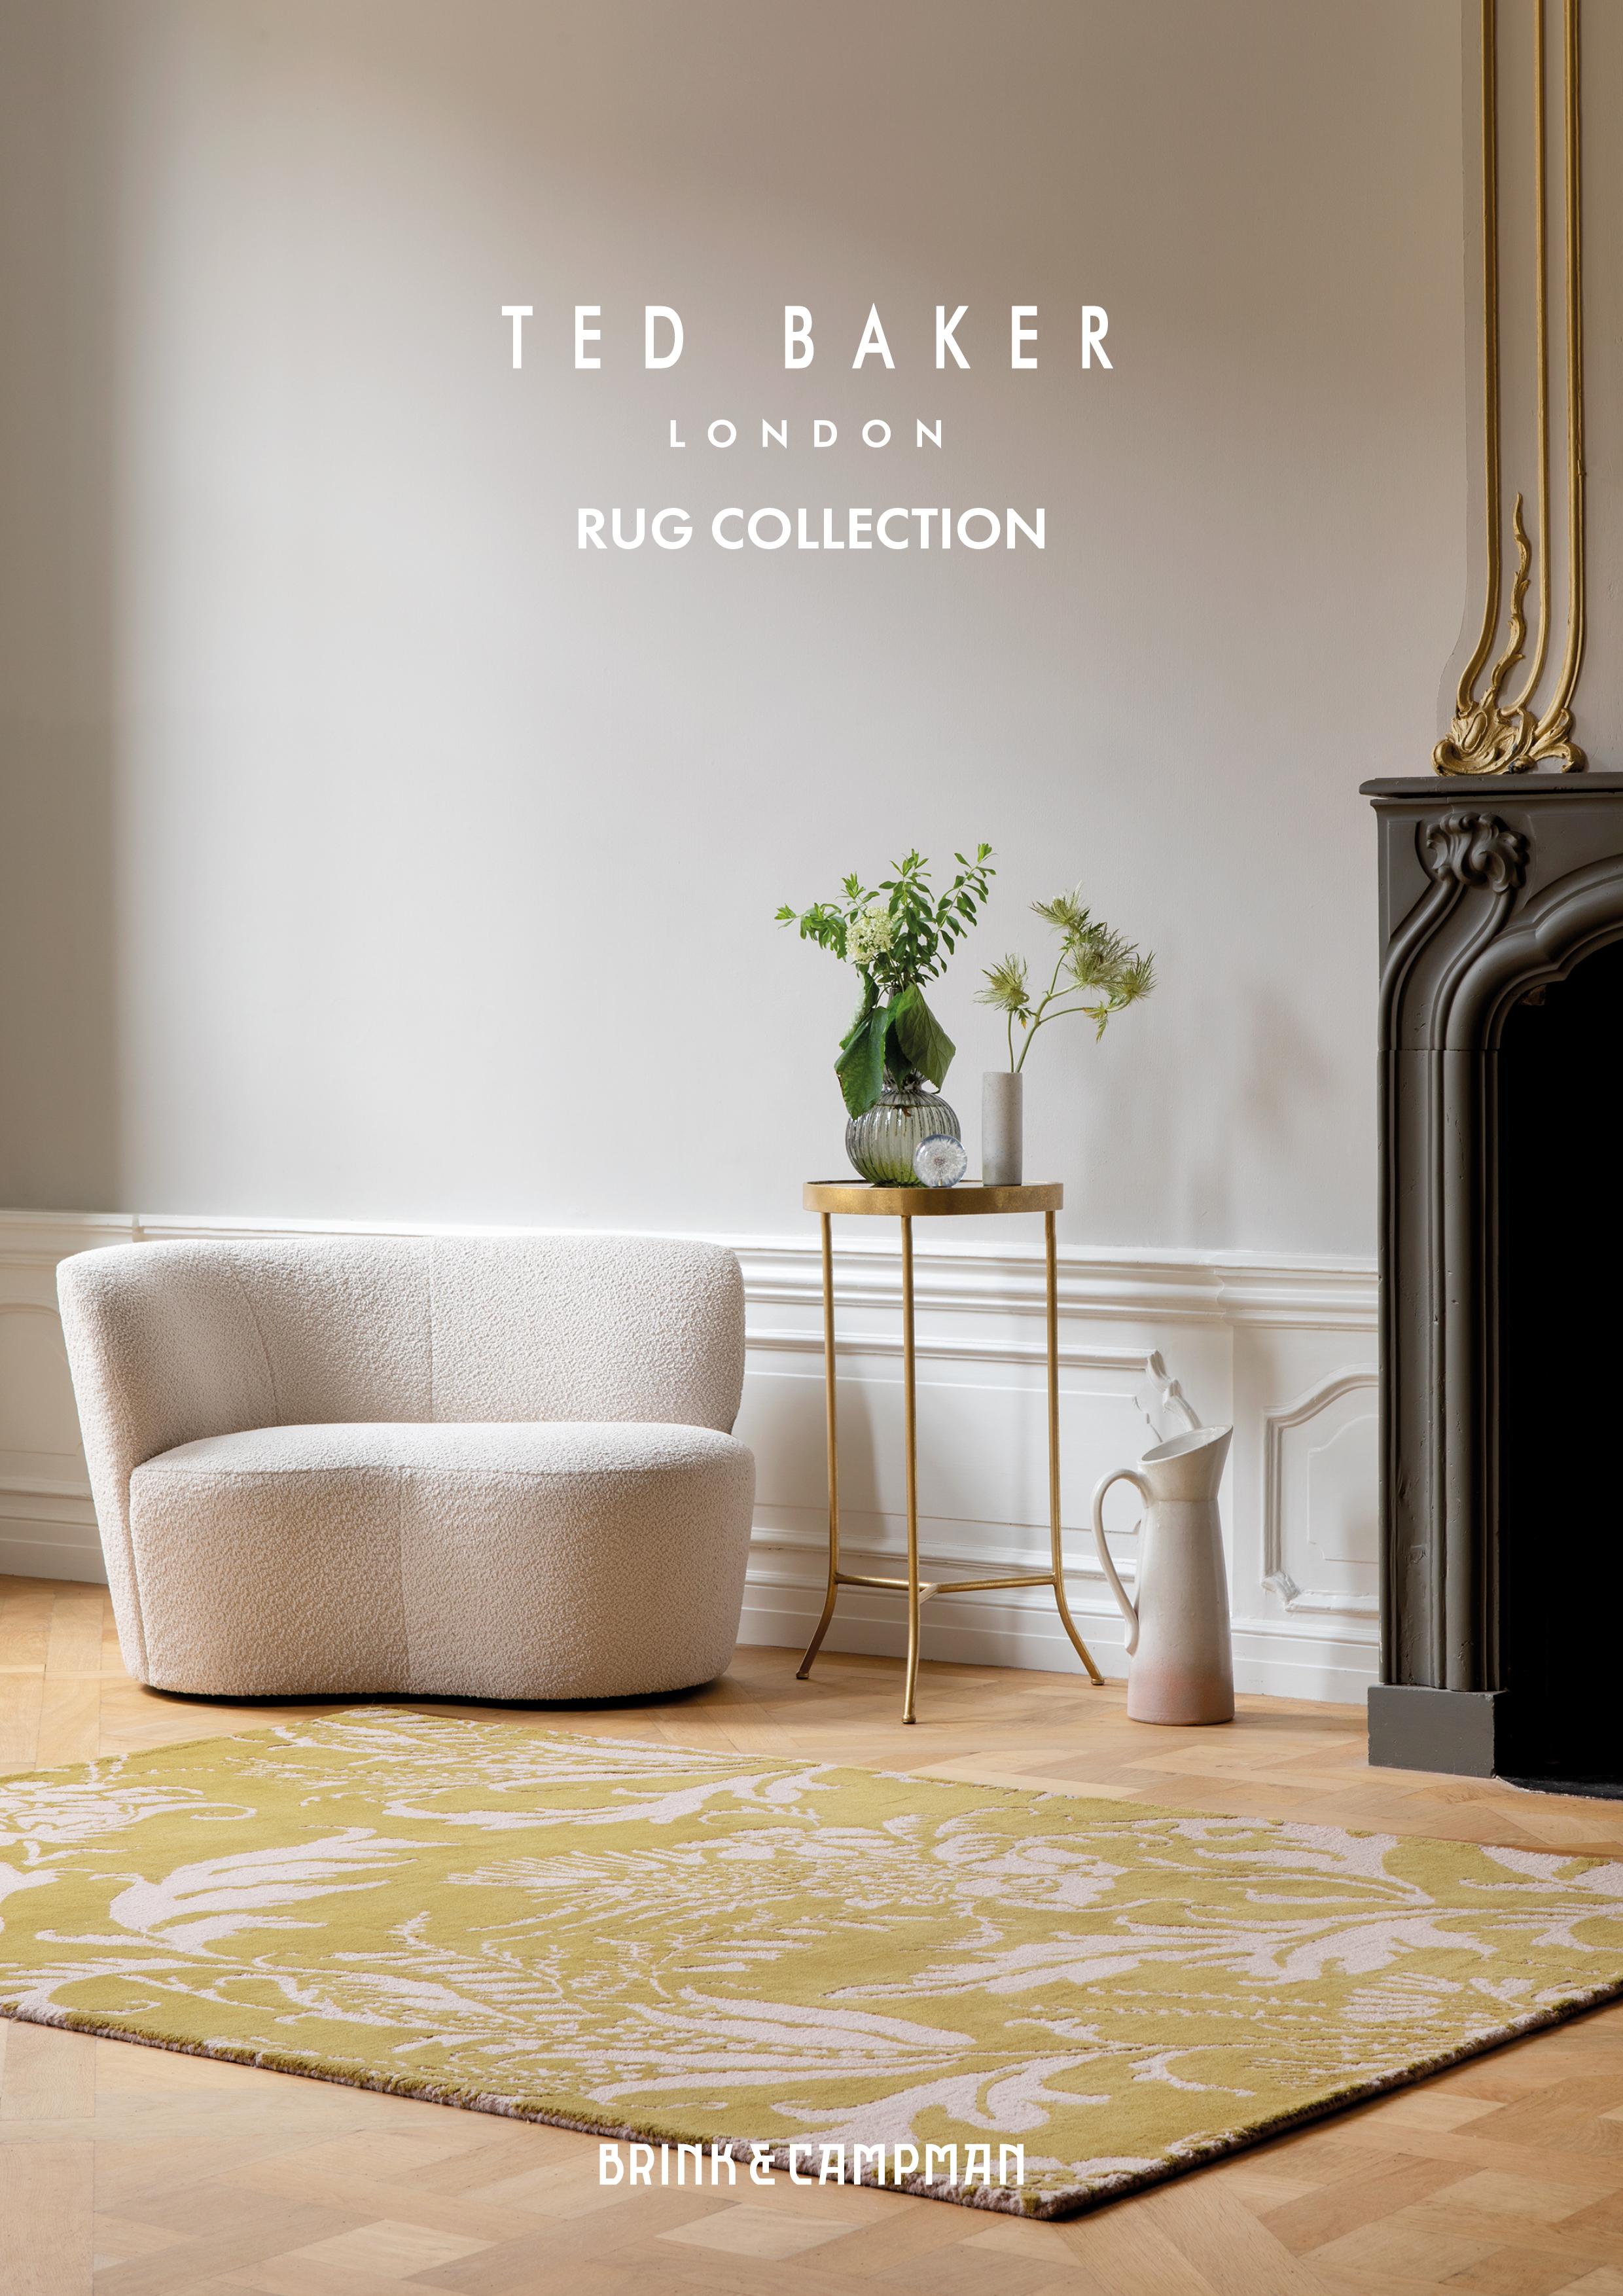 Ted Baker collection